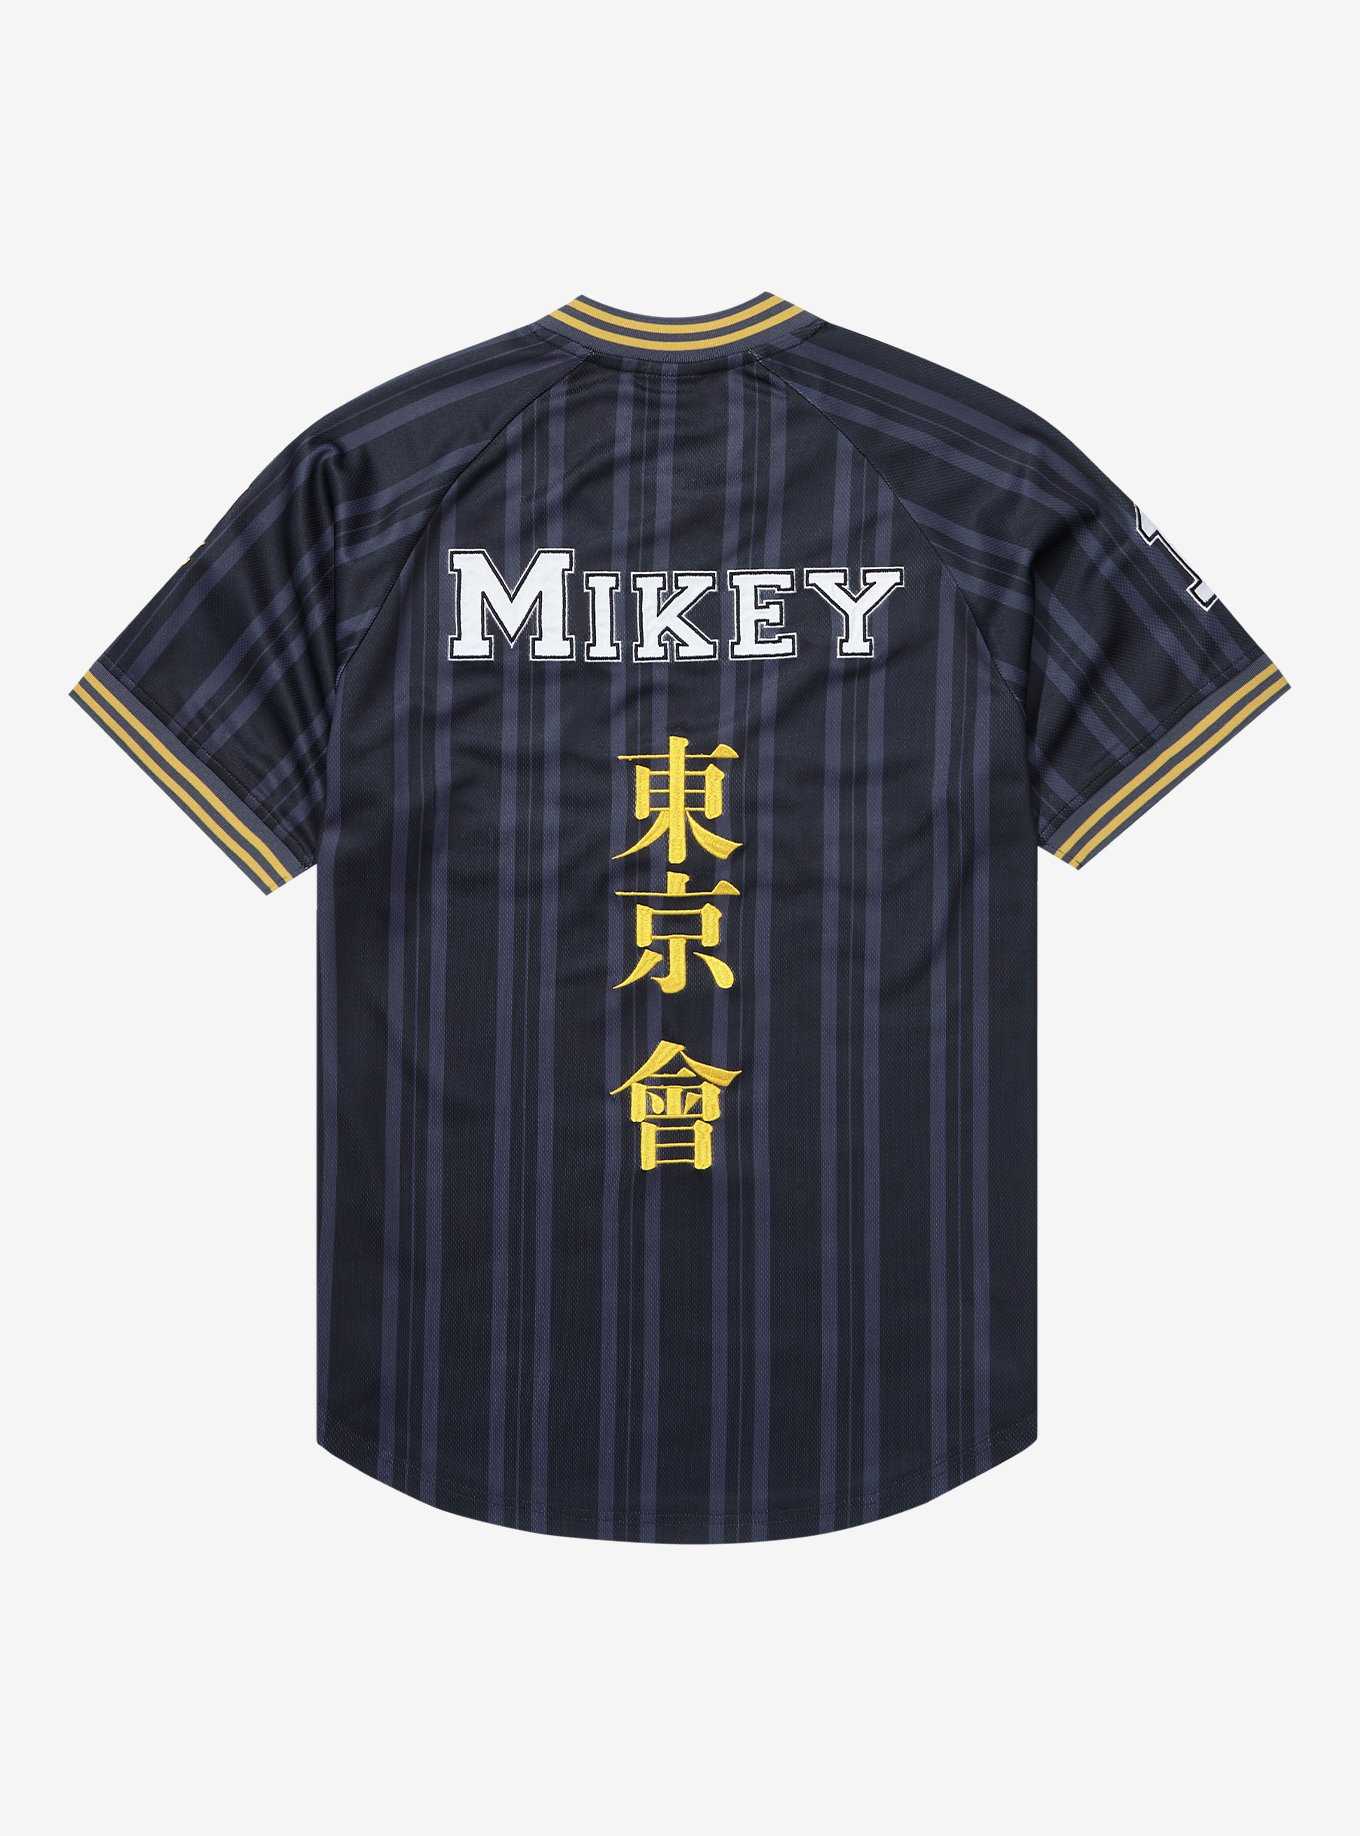 Tokyo Revengers Mikey Soccer Jersey - BoxLunch Exclusive, , hi-res